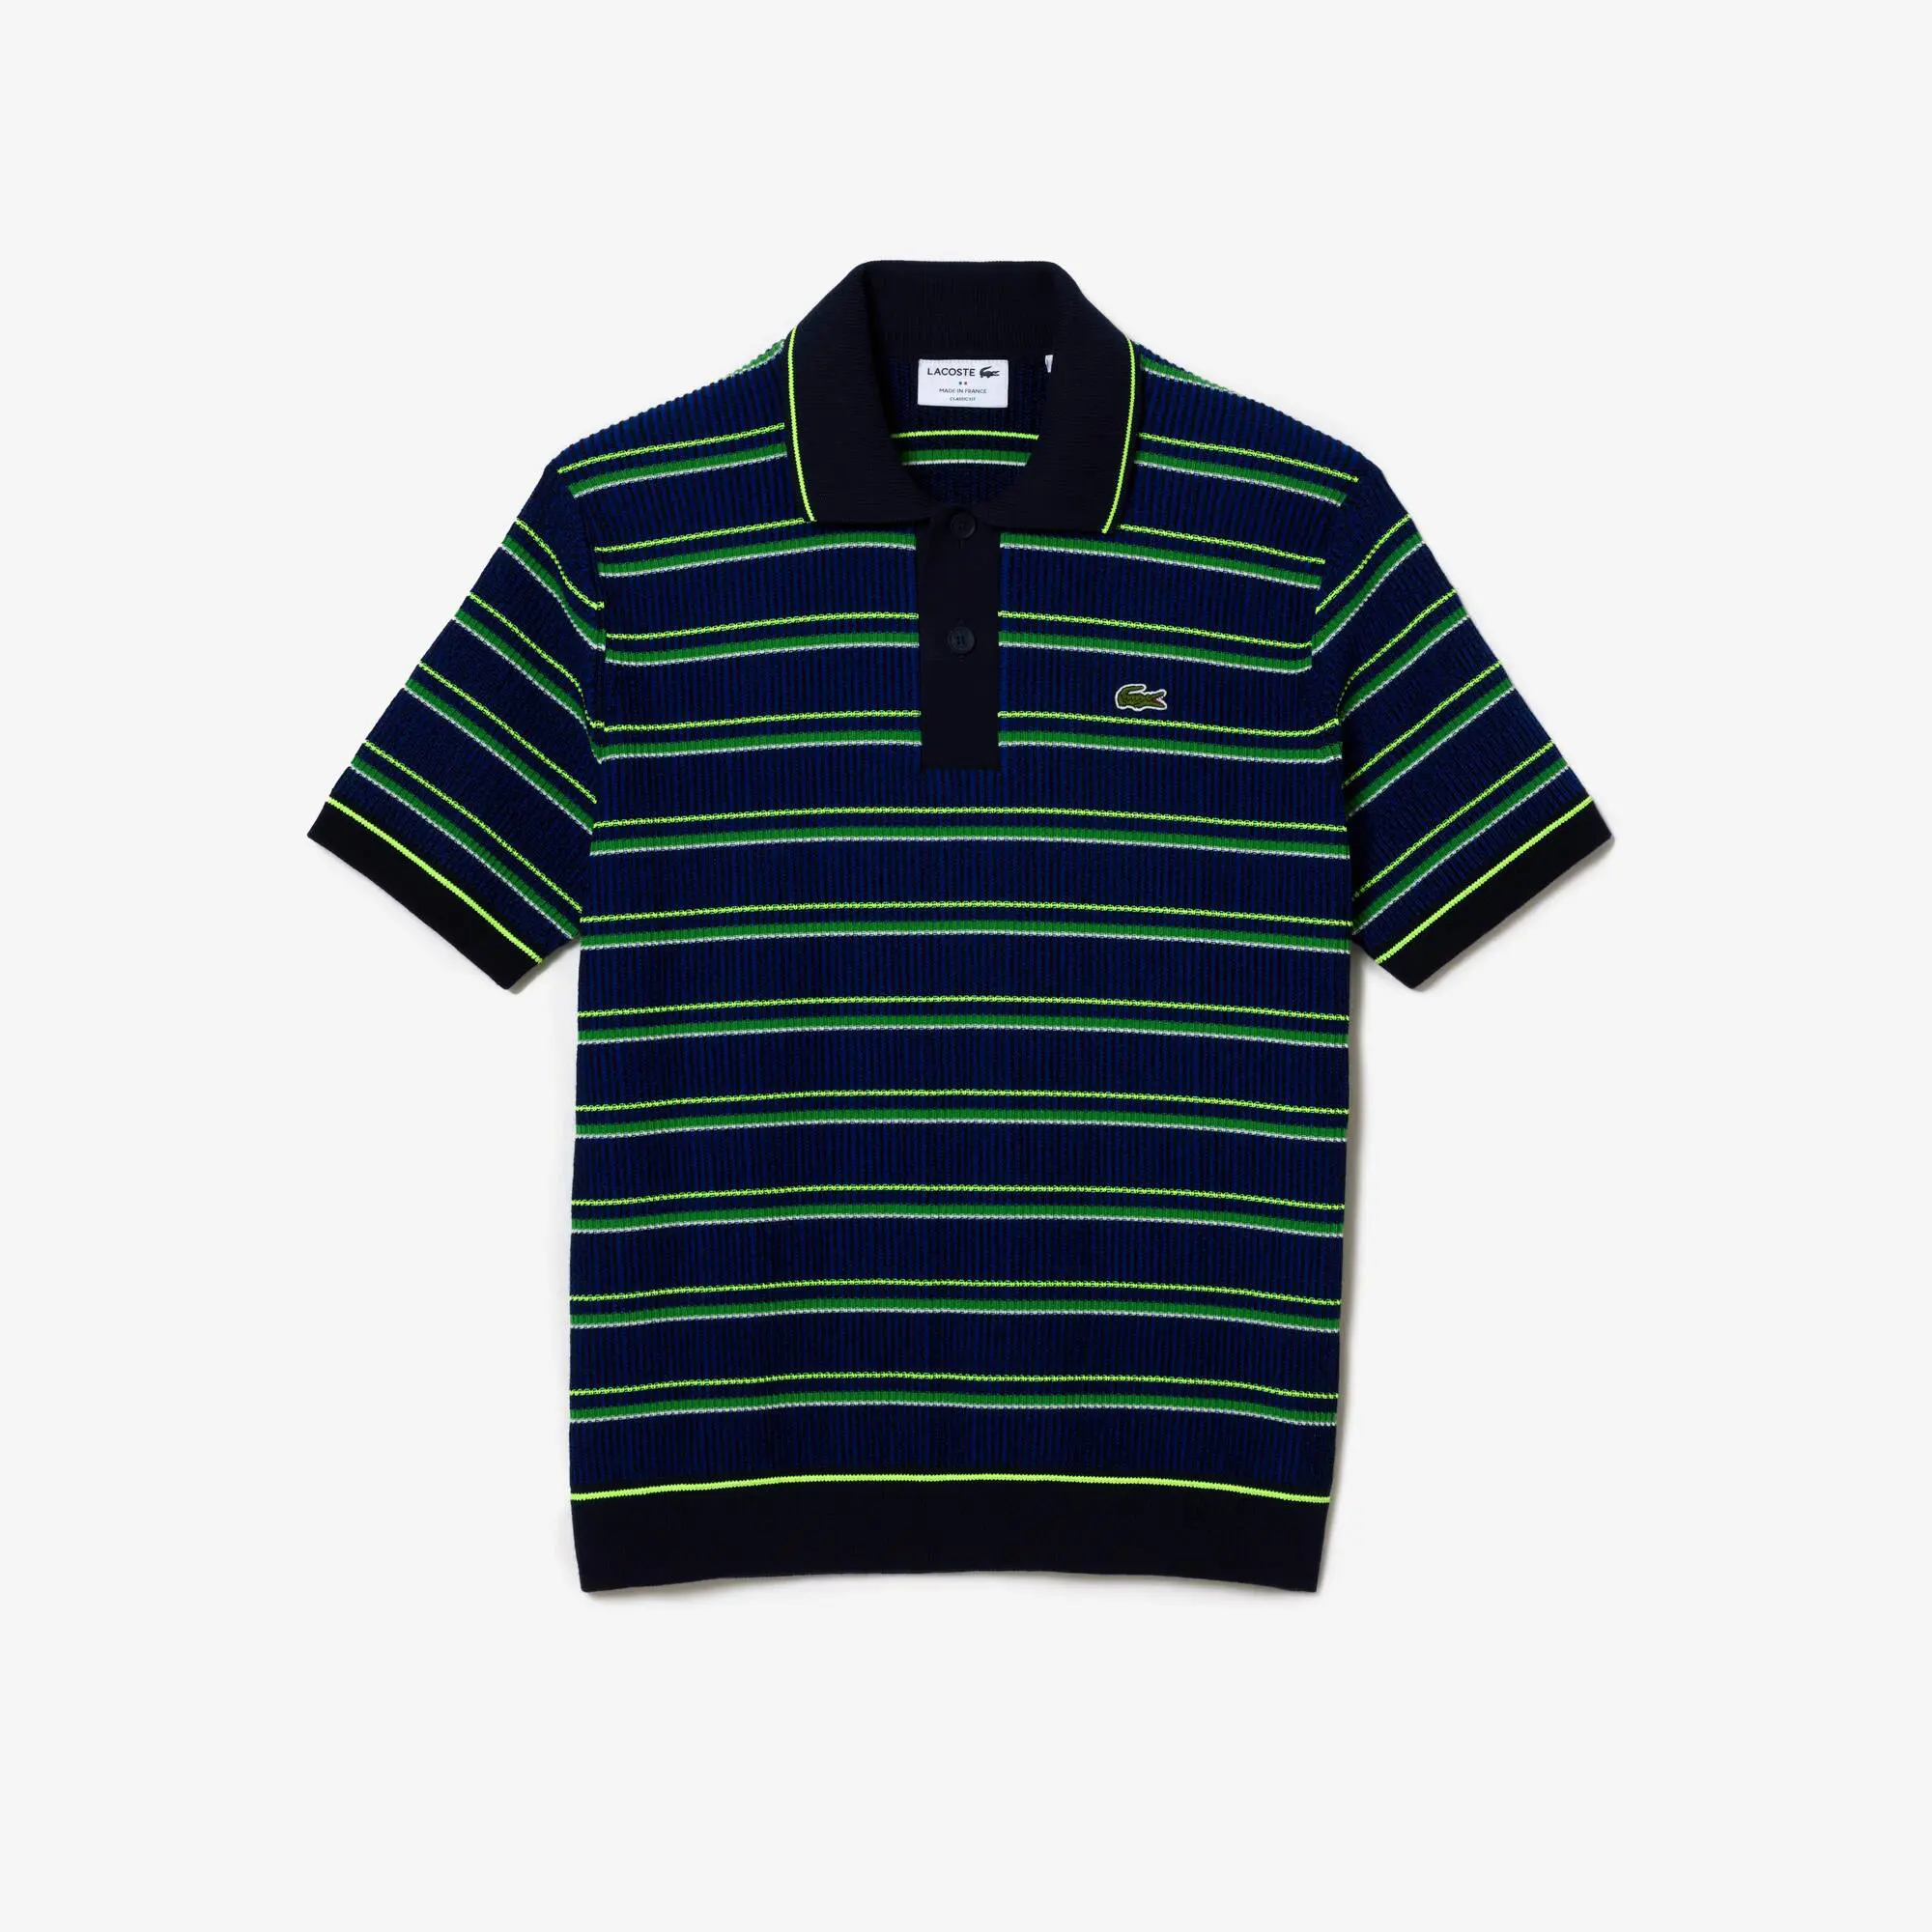 Lacoste Men’s Lacoste Organic Cotton French Made Striped Polo Shirt. 2